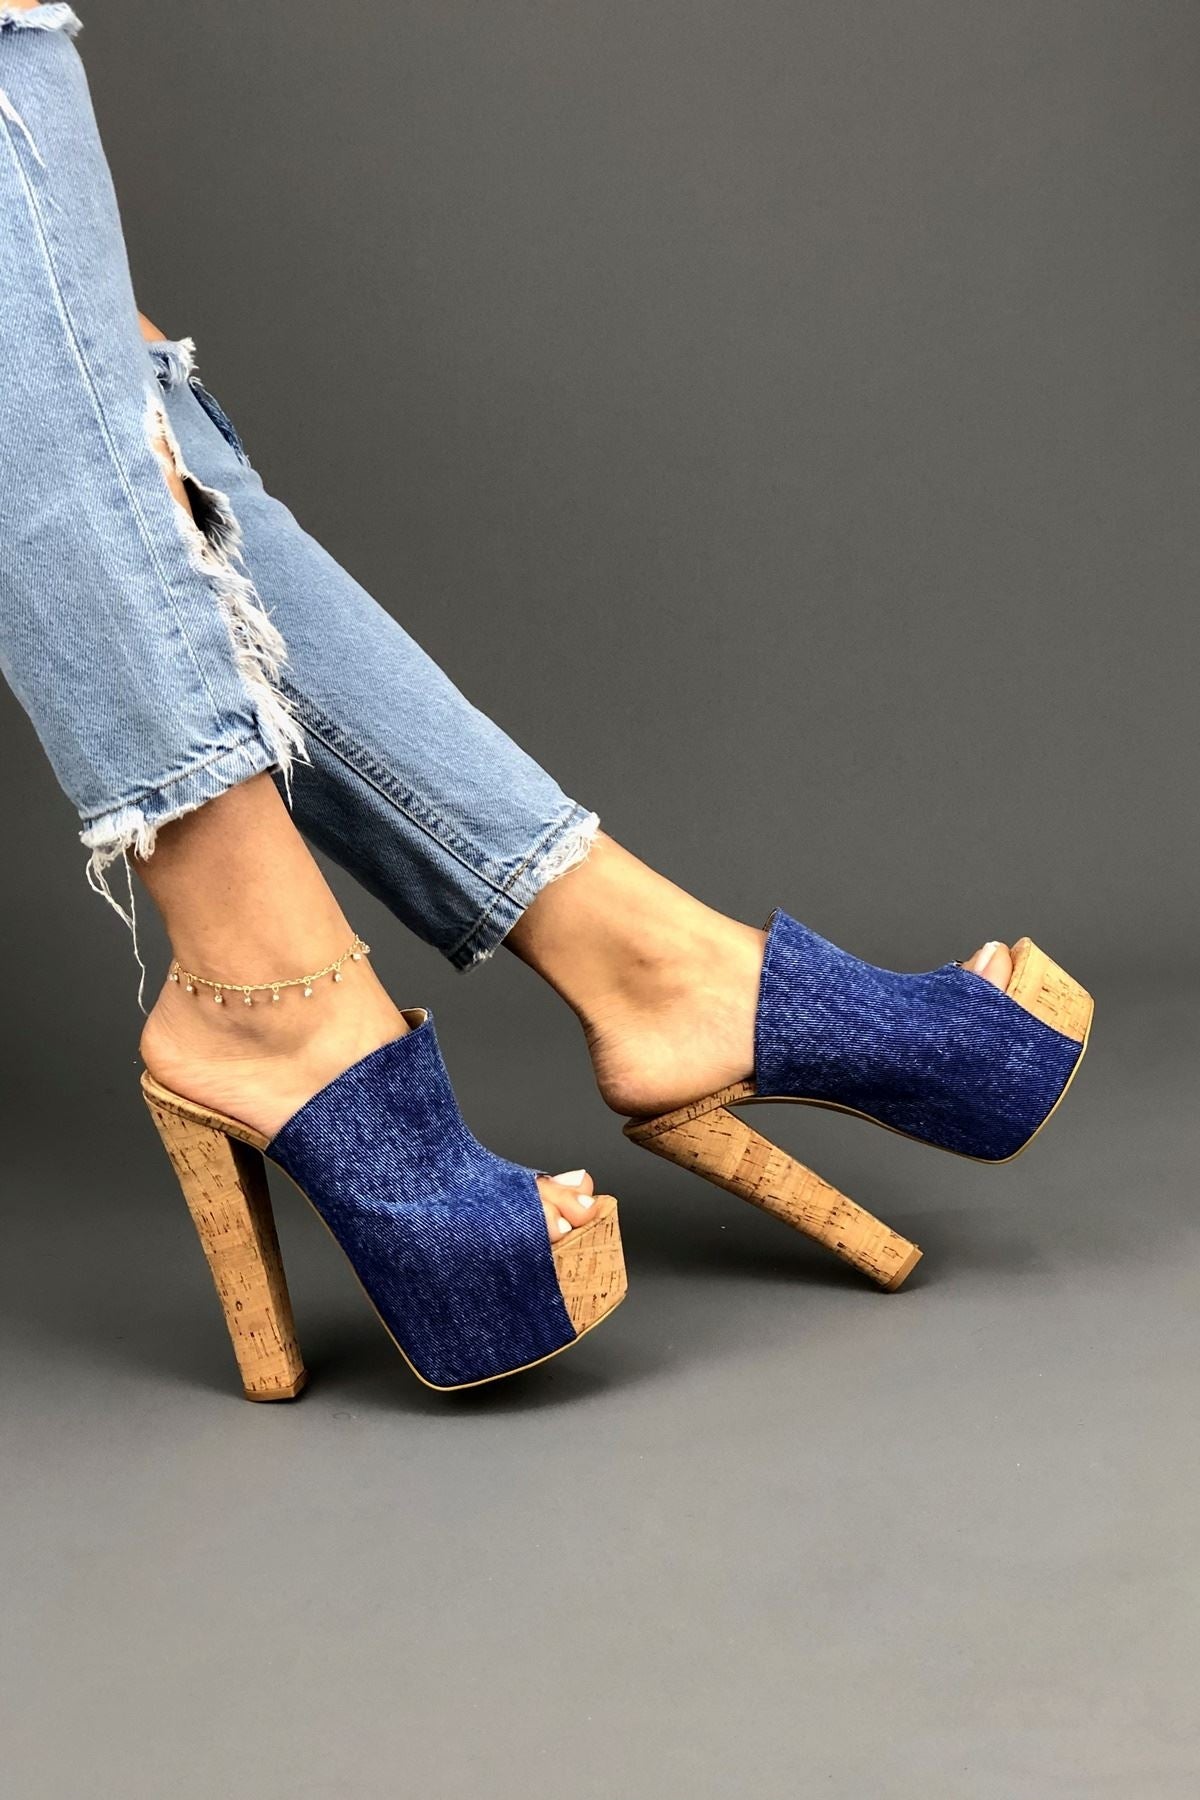 Image of Women's Blue Heeled Slippers